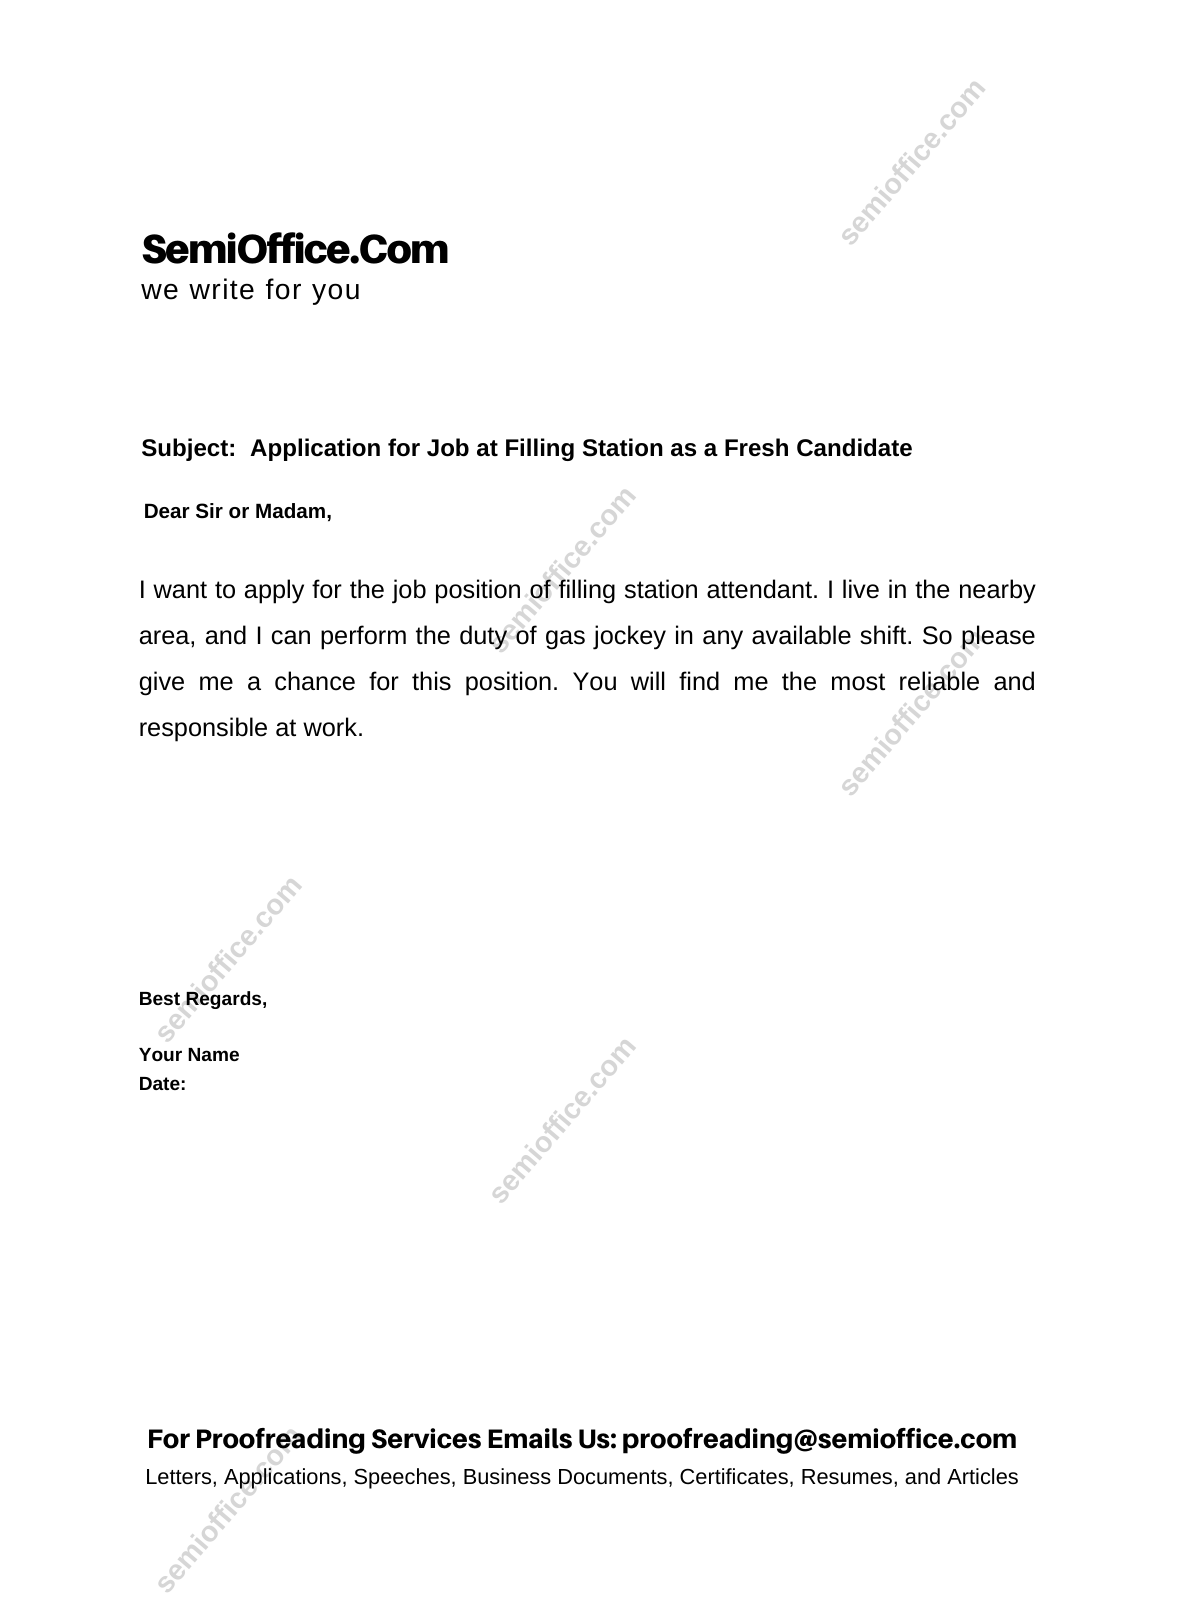 application letter to work at filling station